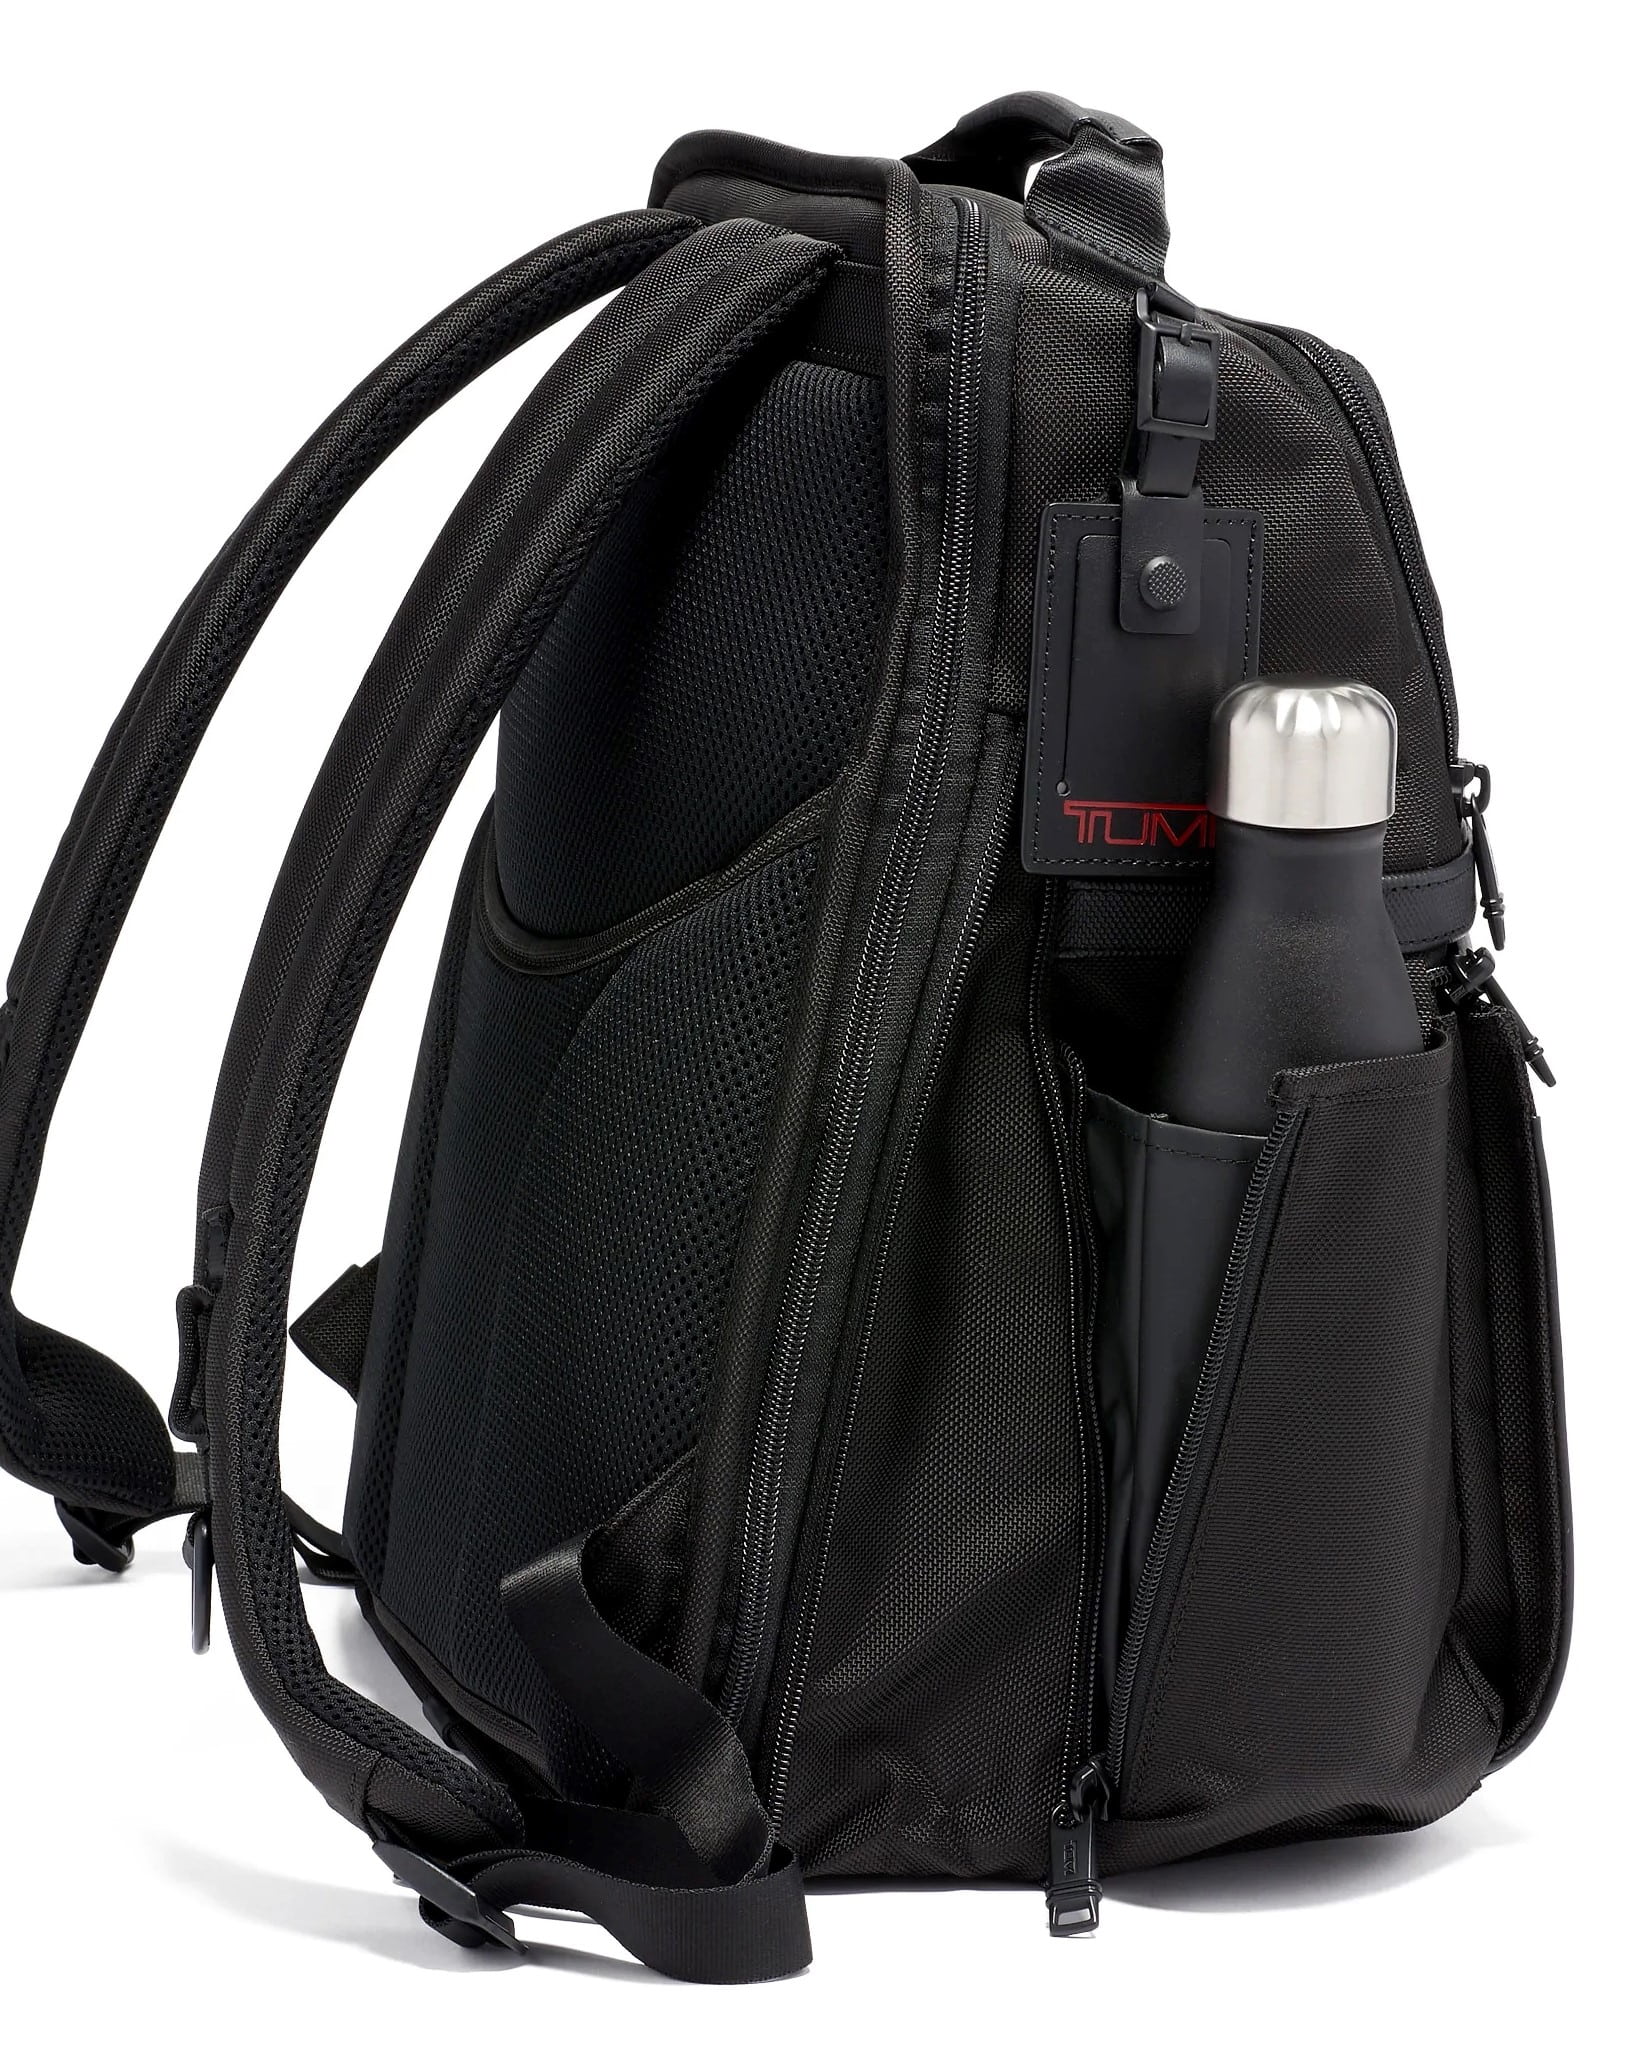 BALO UNISEX LAPTOP TUMI ALPHA SLIM SOLUTIONS BRIEF PACK BACKPACK 8